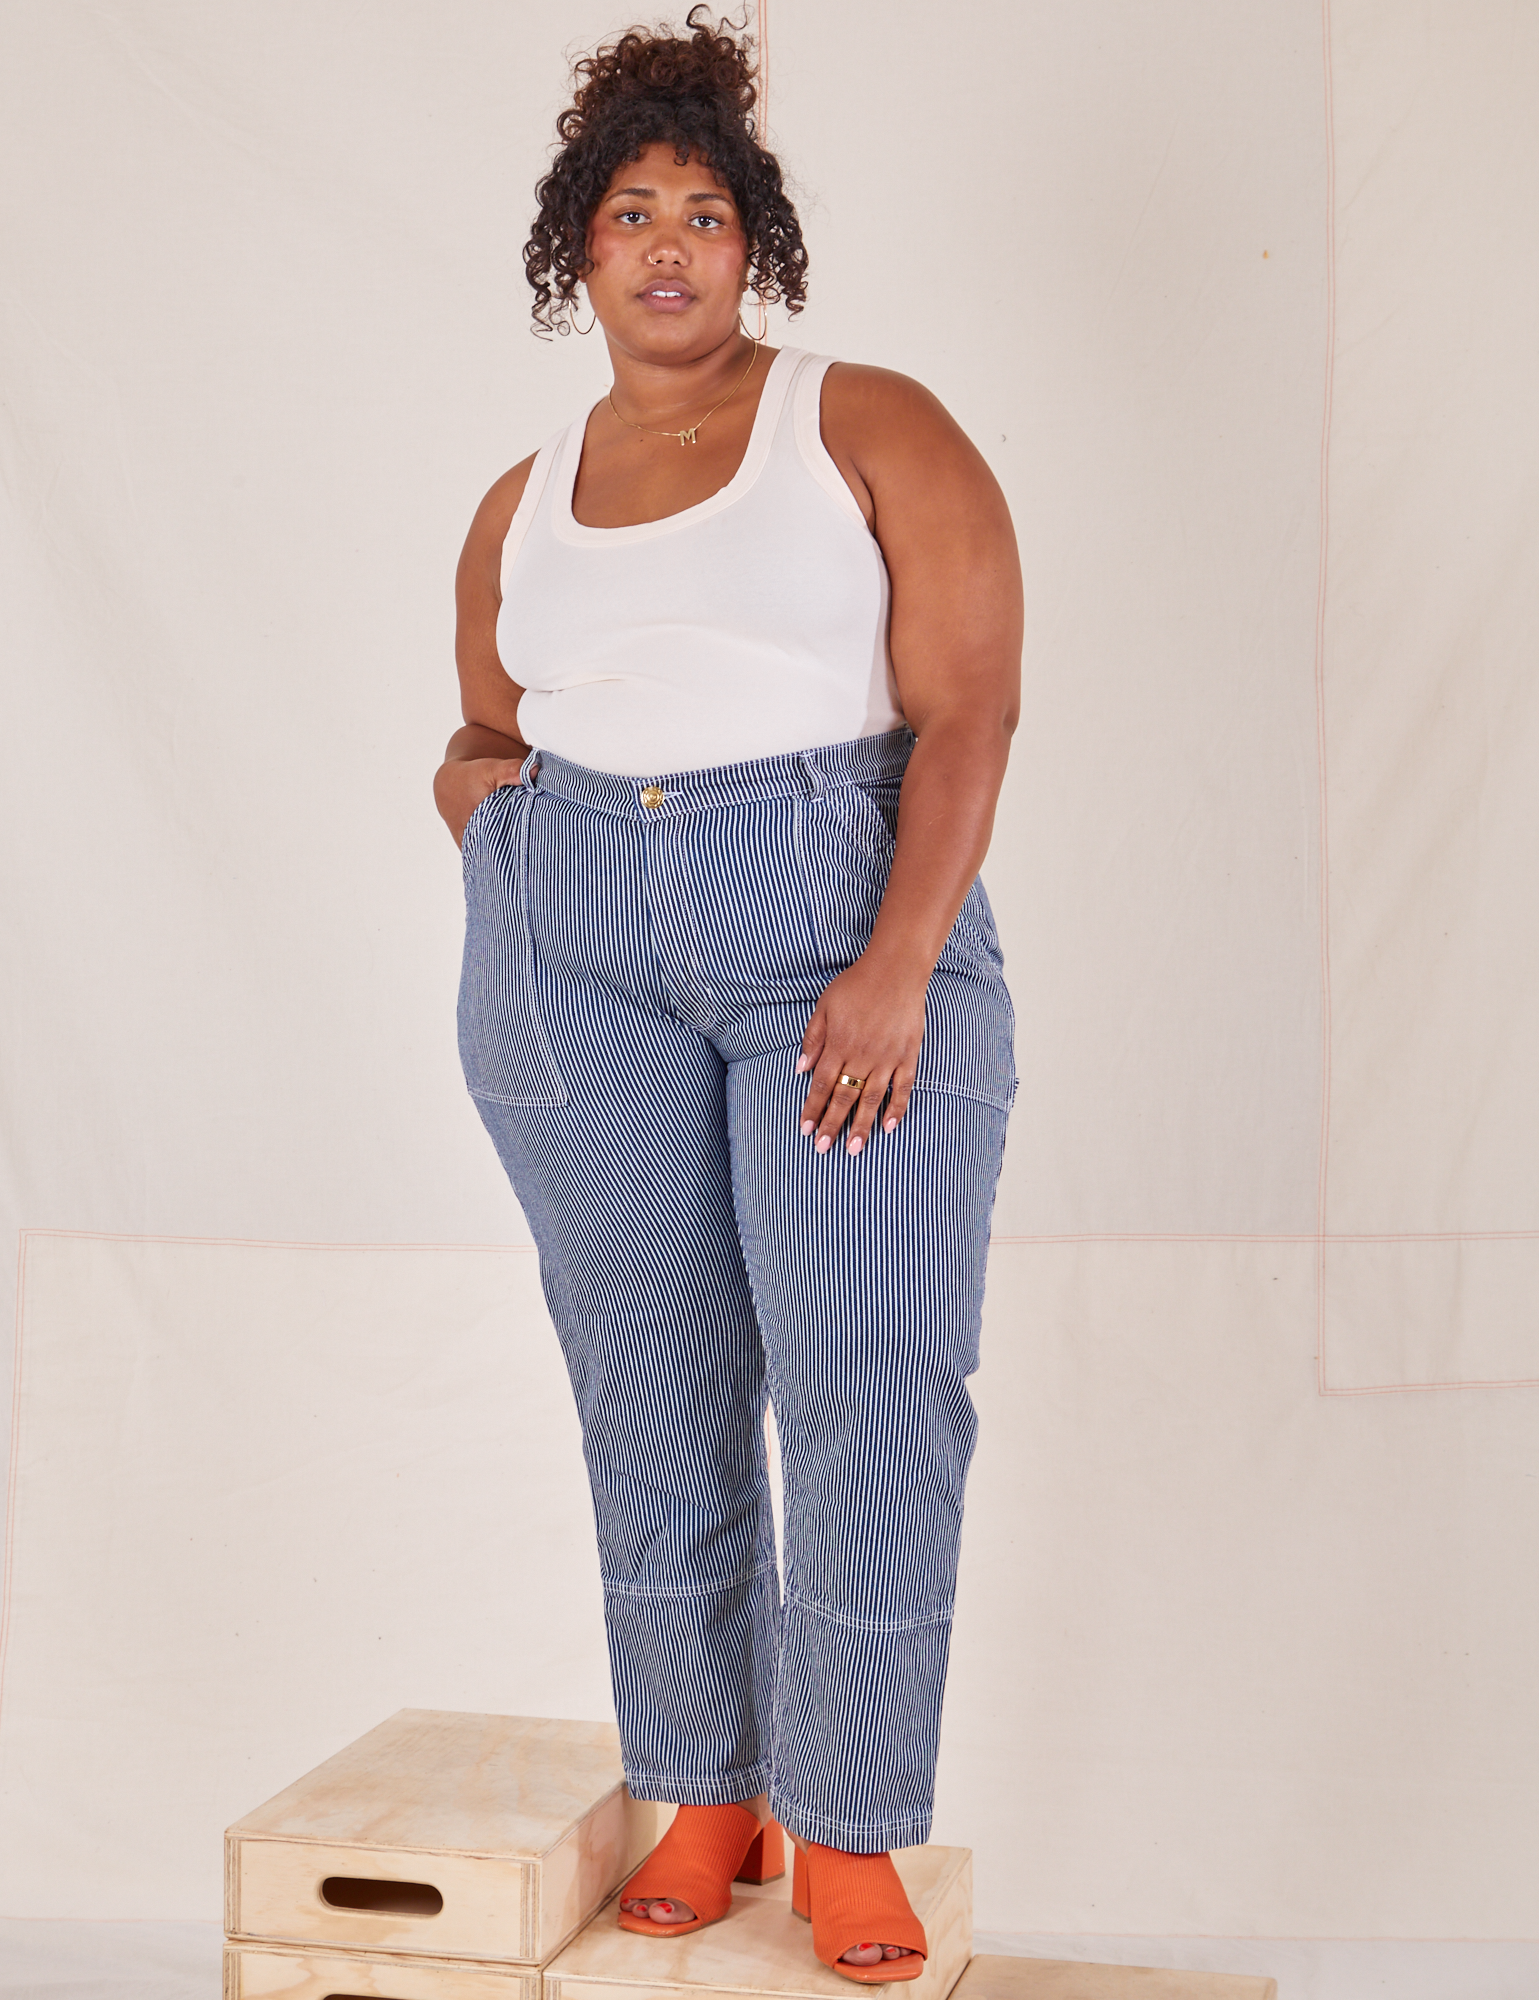 Morgan is 5&#39;5&quot; and wearing 1XL Carpenter Jeans in Railroad Stripes paired with vintage off-white Tank Top